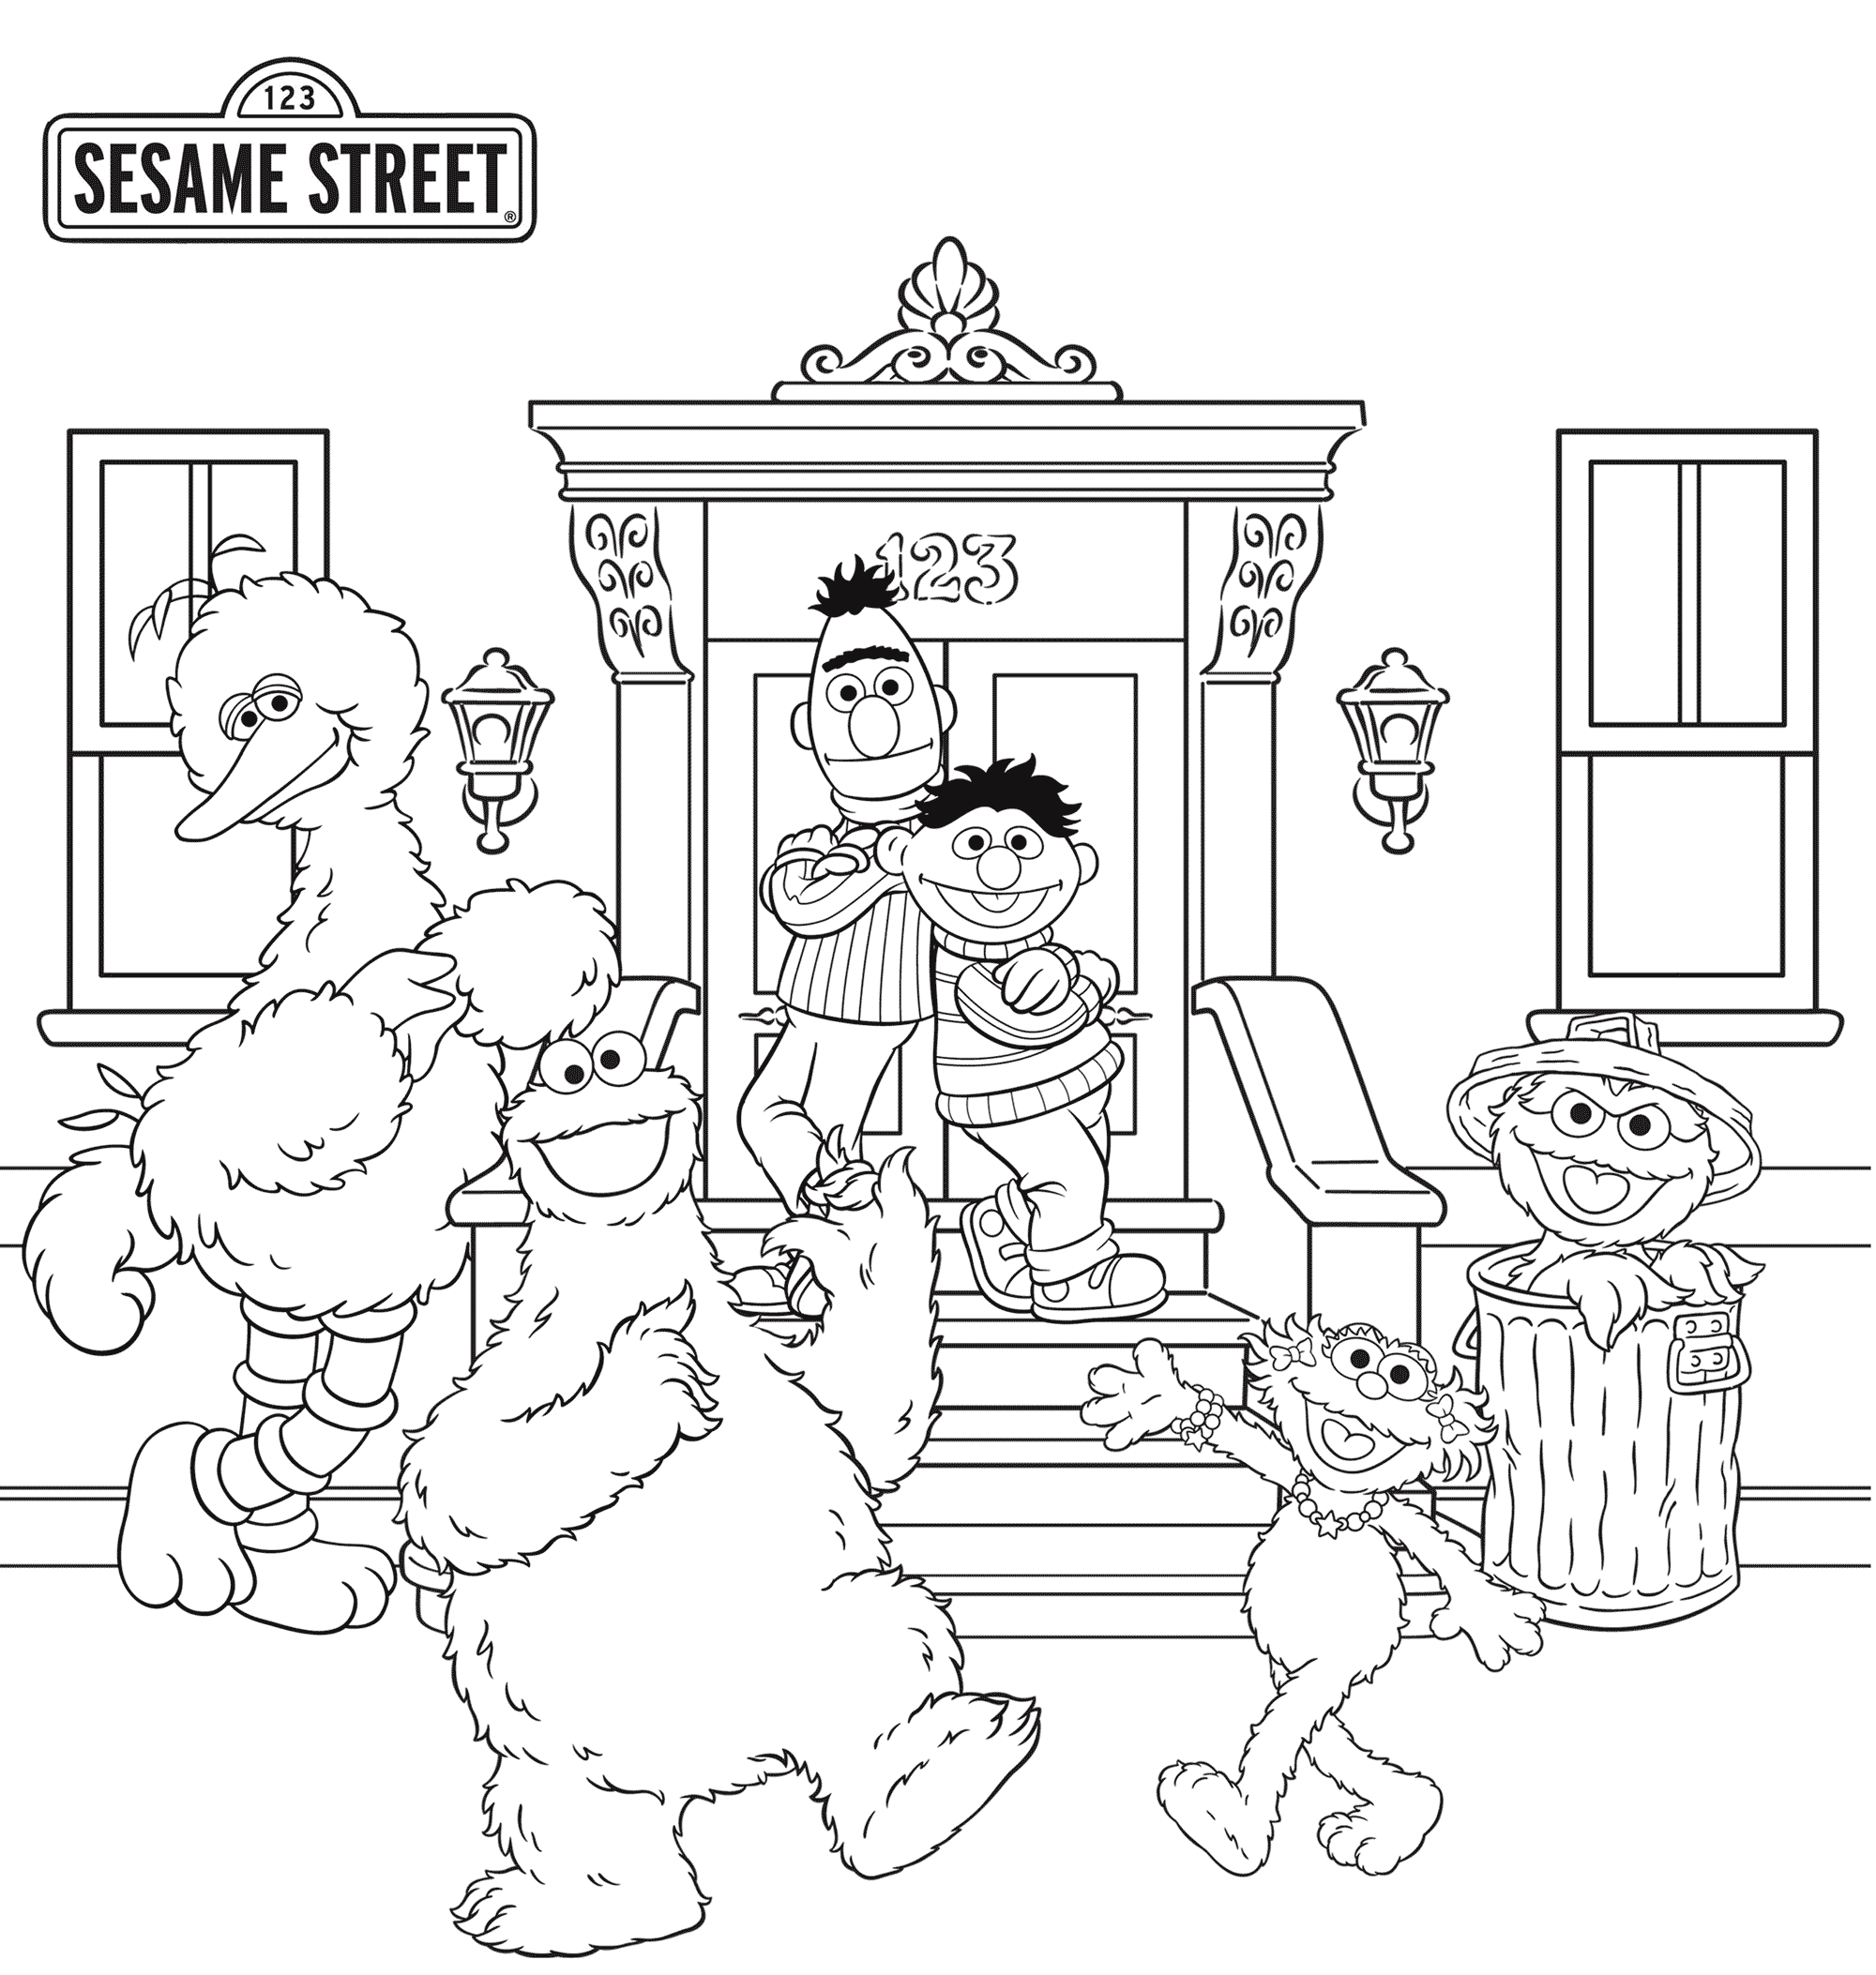 sesame street coloring pages to print coloringstar